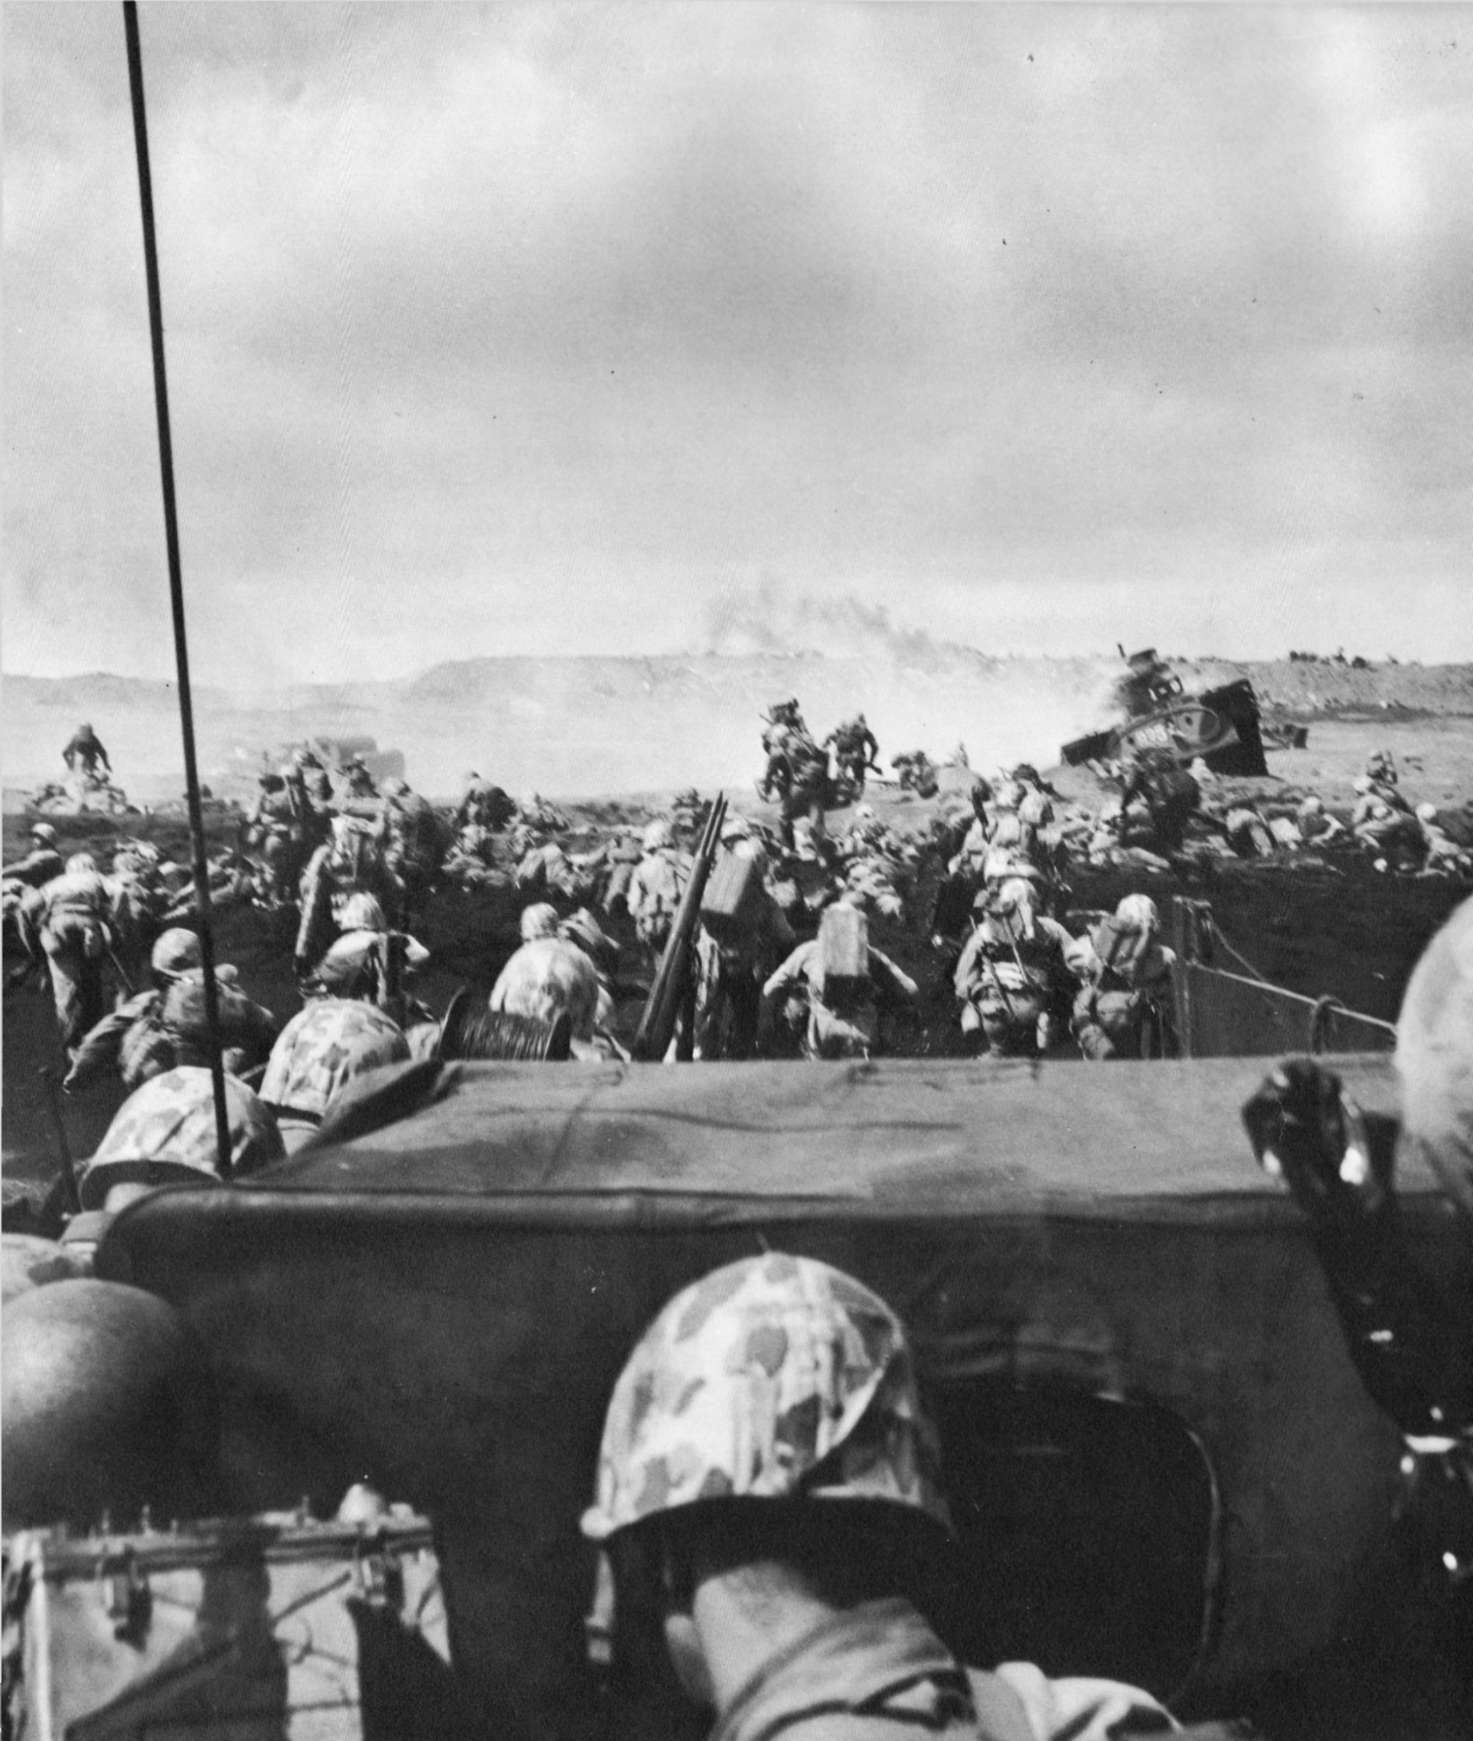 Men of the US 4th Marines rushing out of their landing craft for Iwo Jima landing beach, 19 Feb 1945, photo 1 of 2; note LVT burning in right center